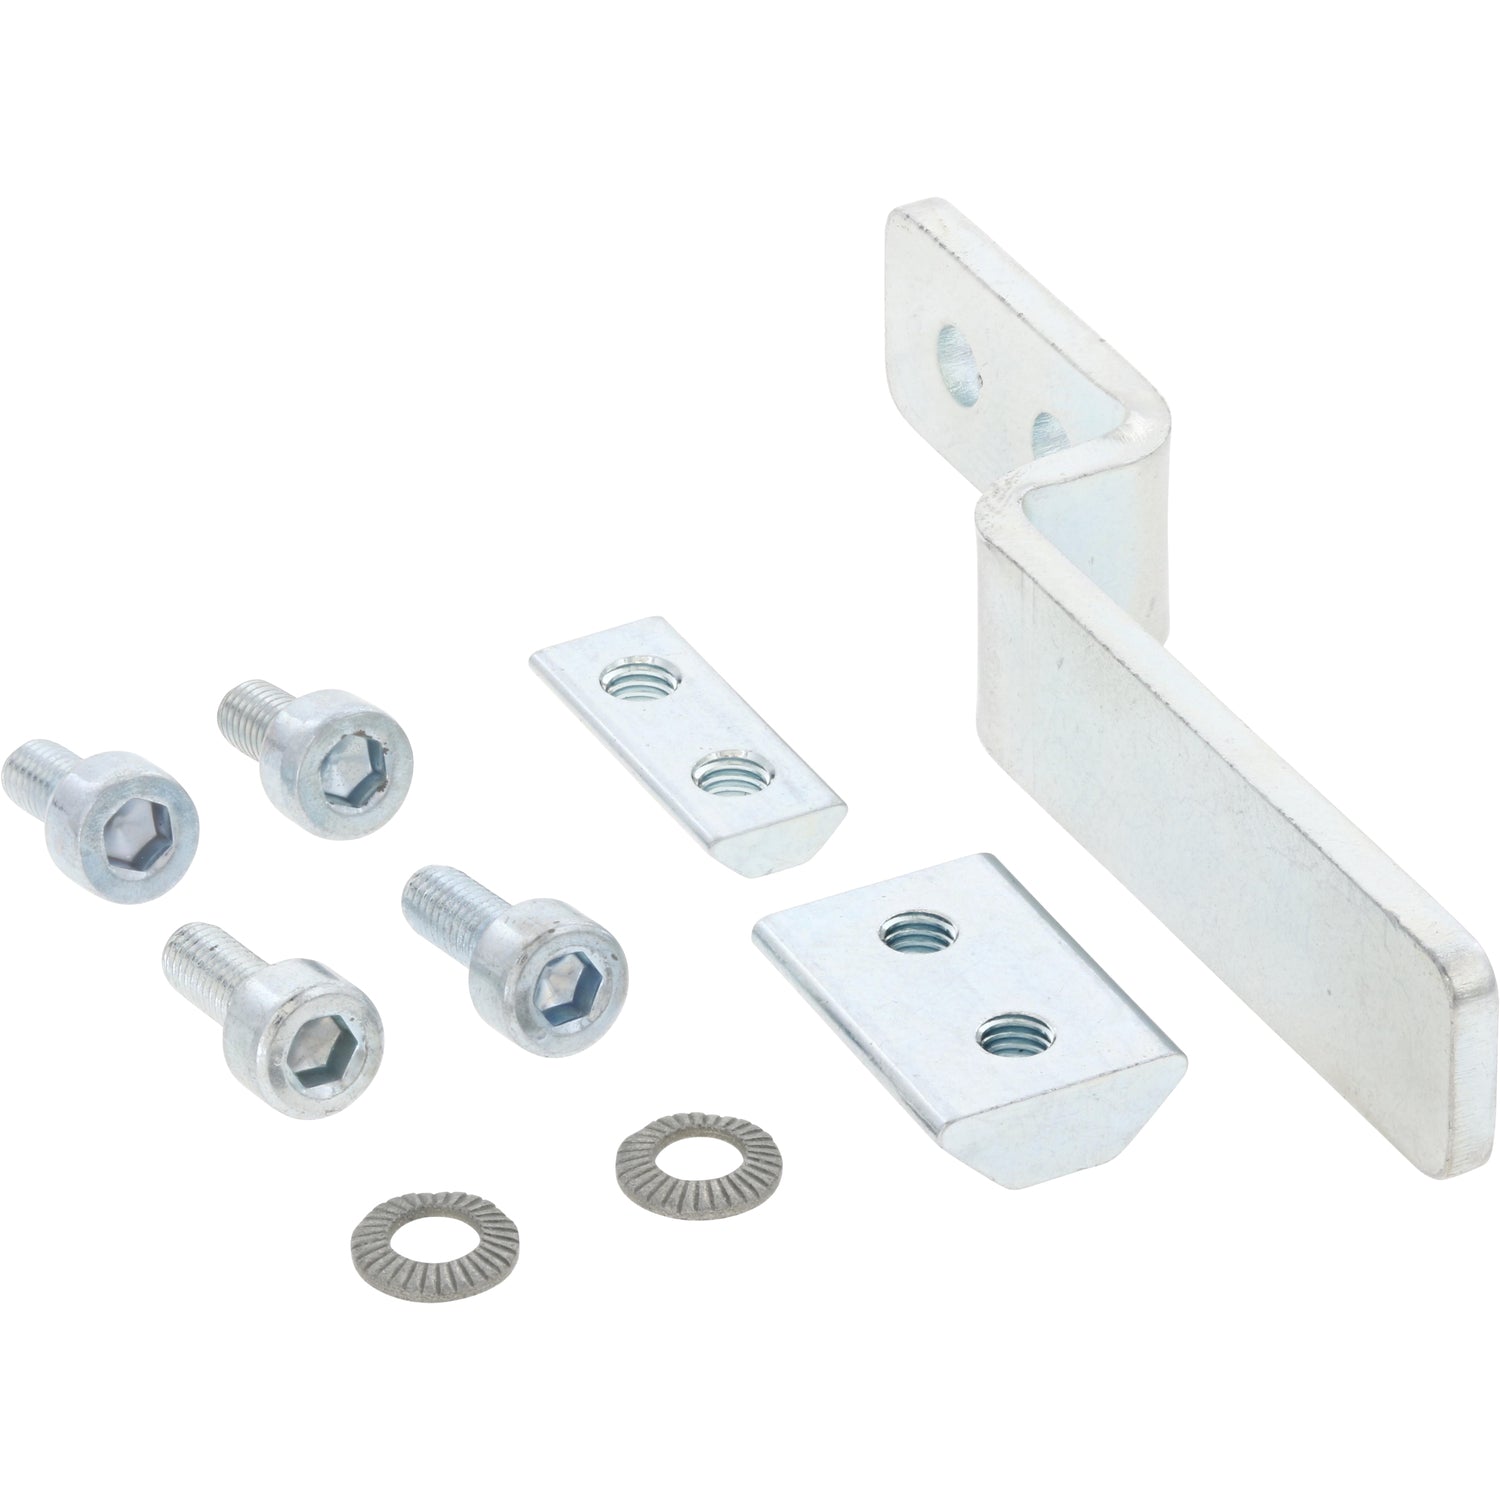 An assortment of fasteners next to a bent switch lug. Parts shown on white background. 